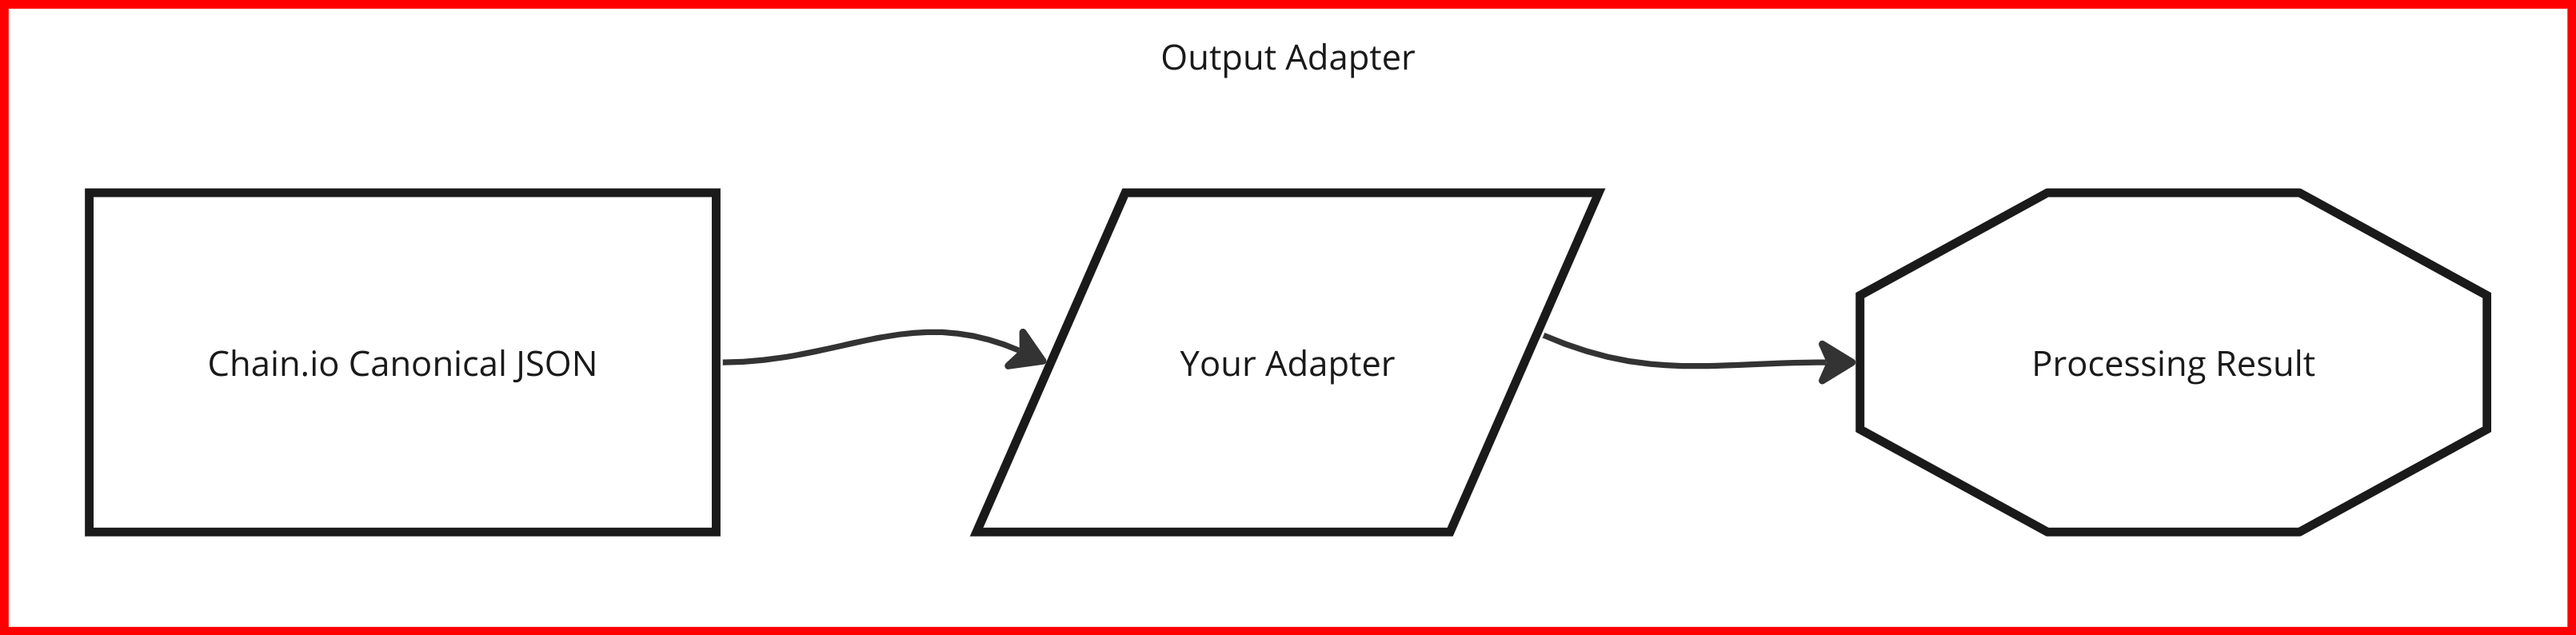 Diagram showing the life-cycle of an output adapter